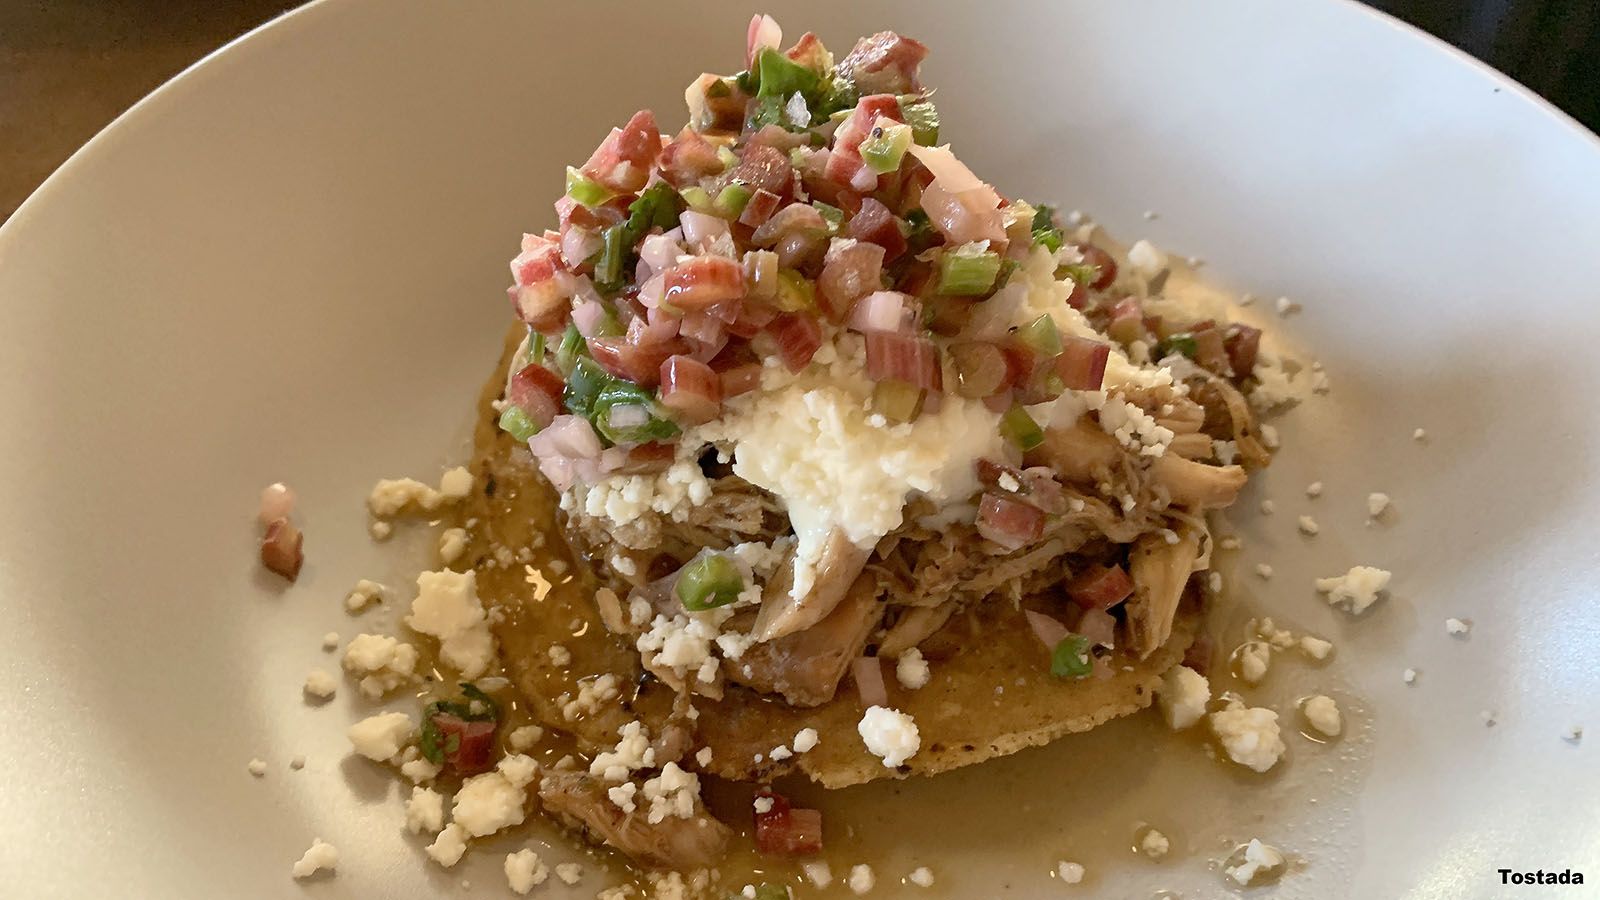 The tostada with braised chicken, chipotle, rhubarb pico, cotija cheese, and crème fraîche delivers a balance of flavors and textures.